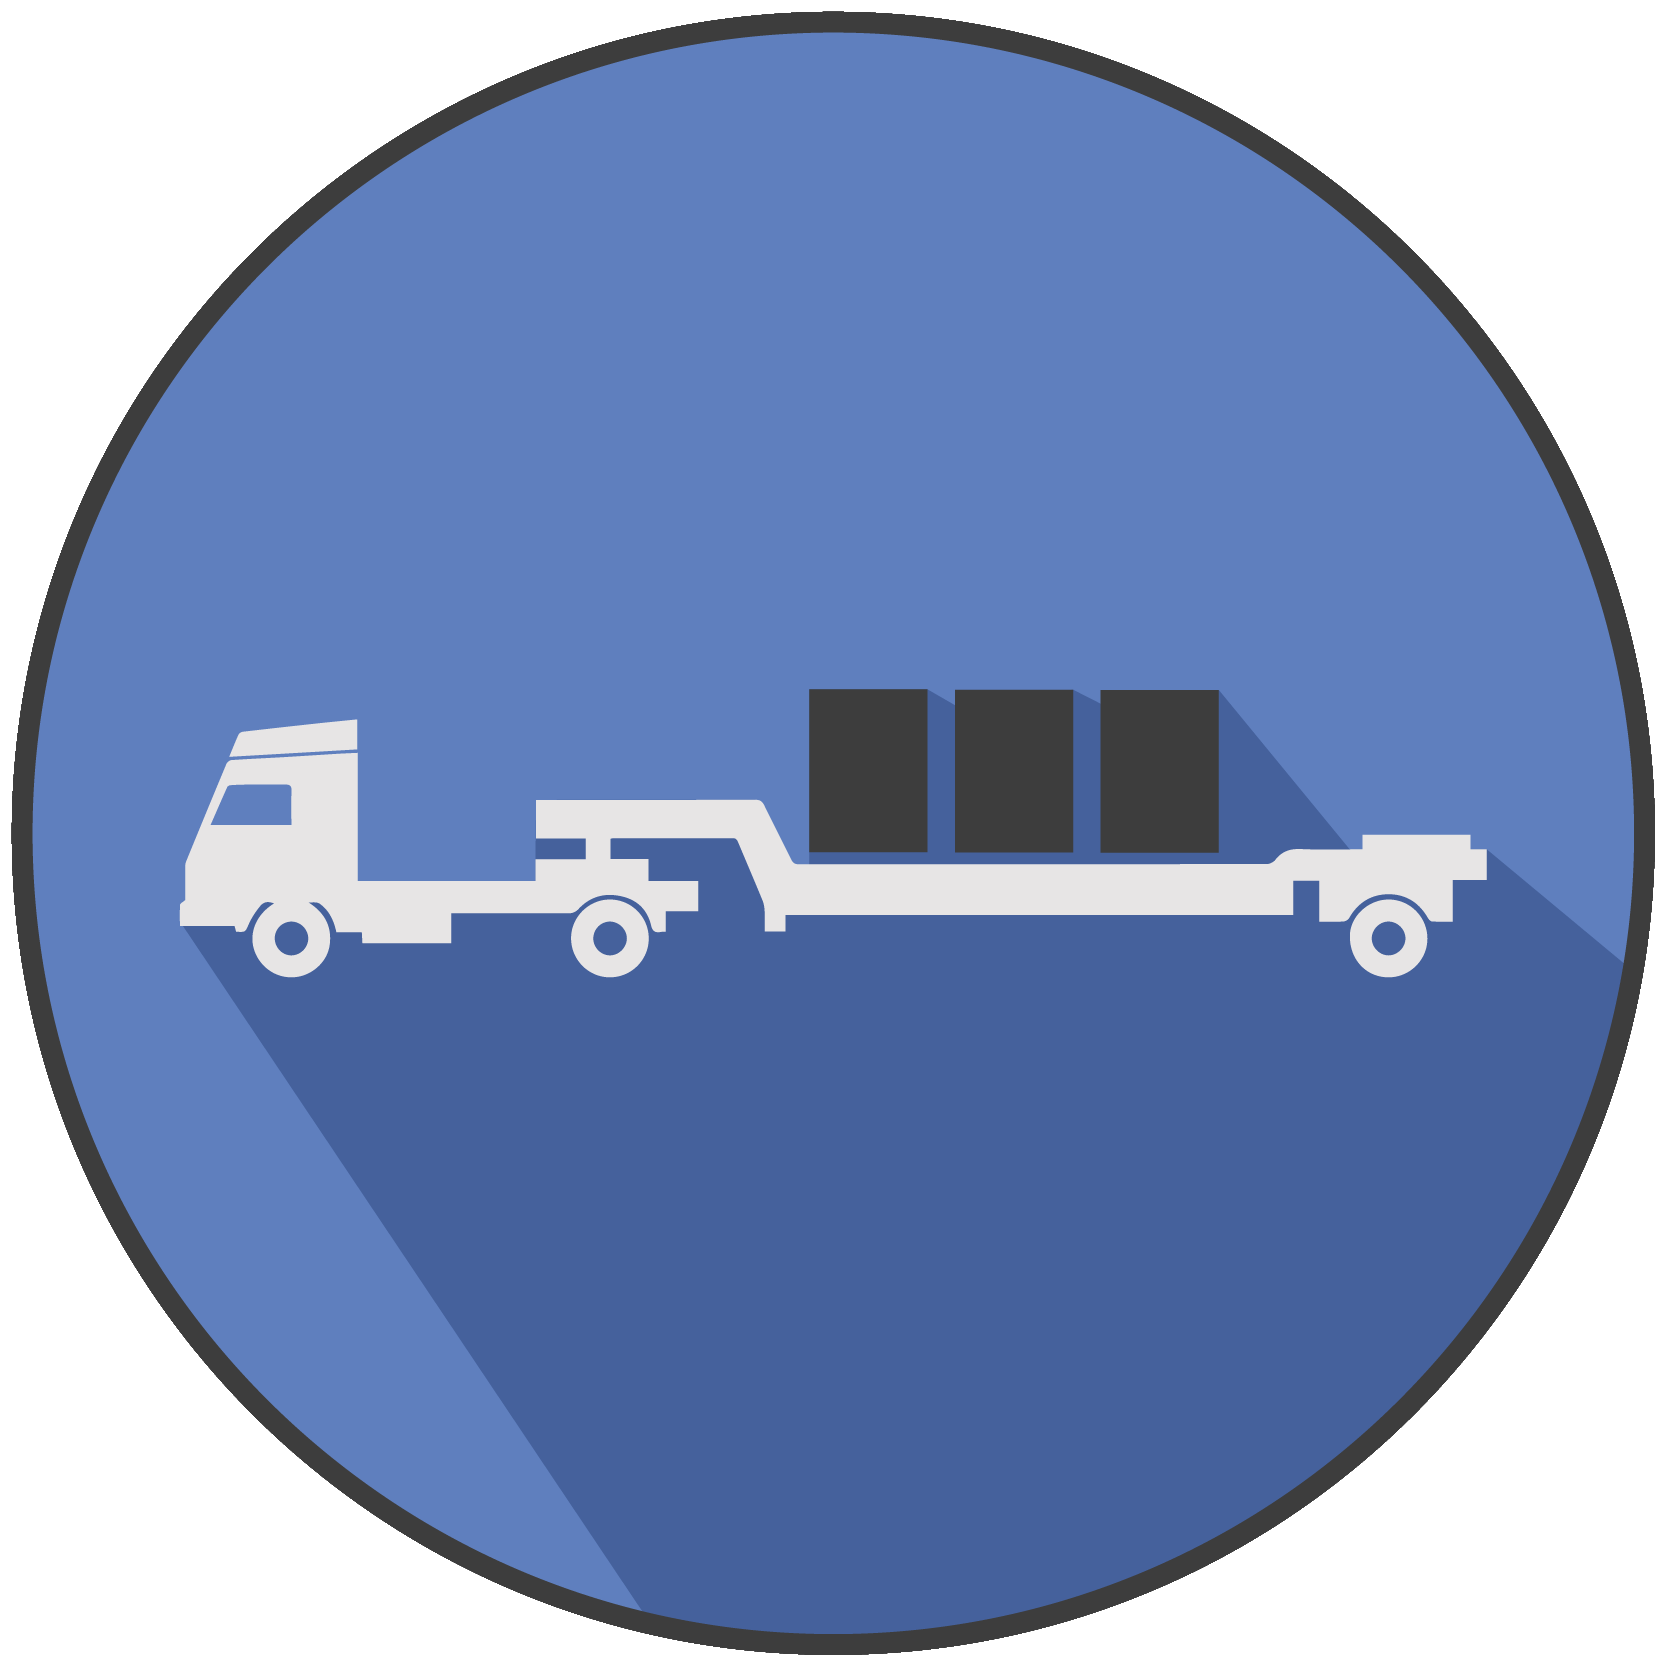 Trailers Within India Service